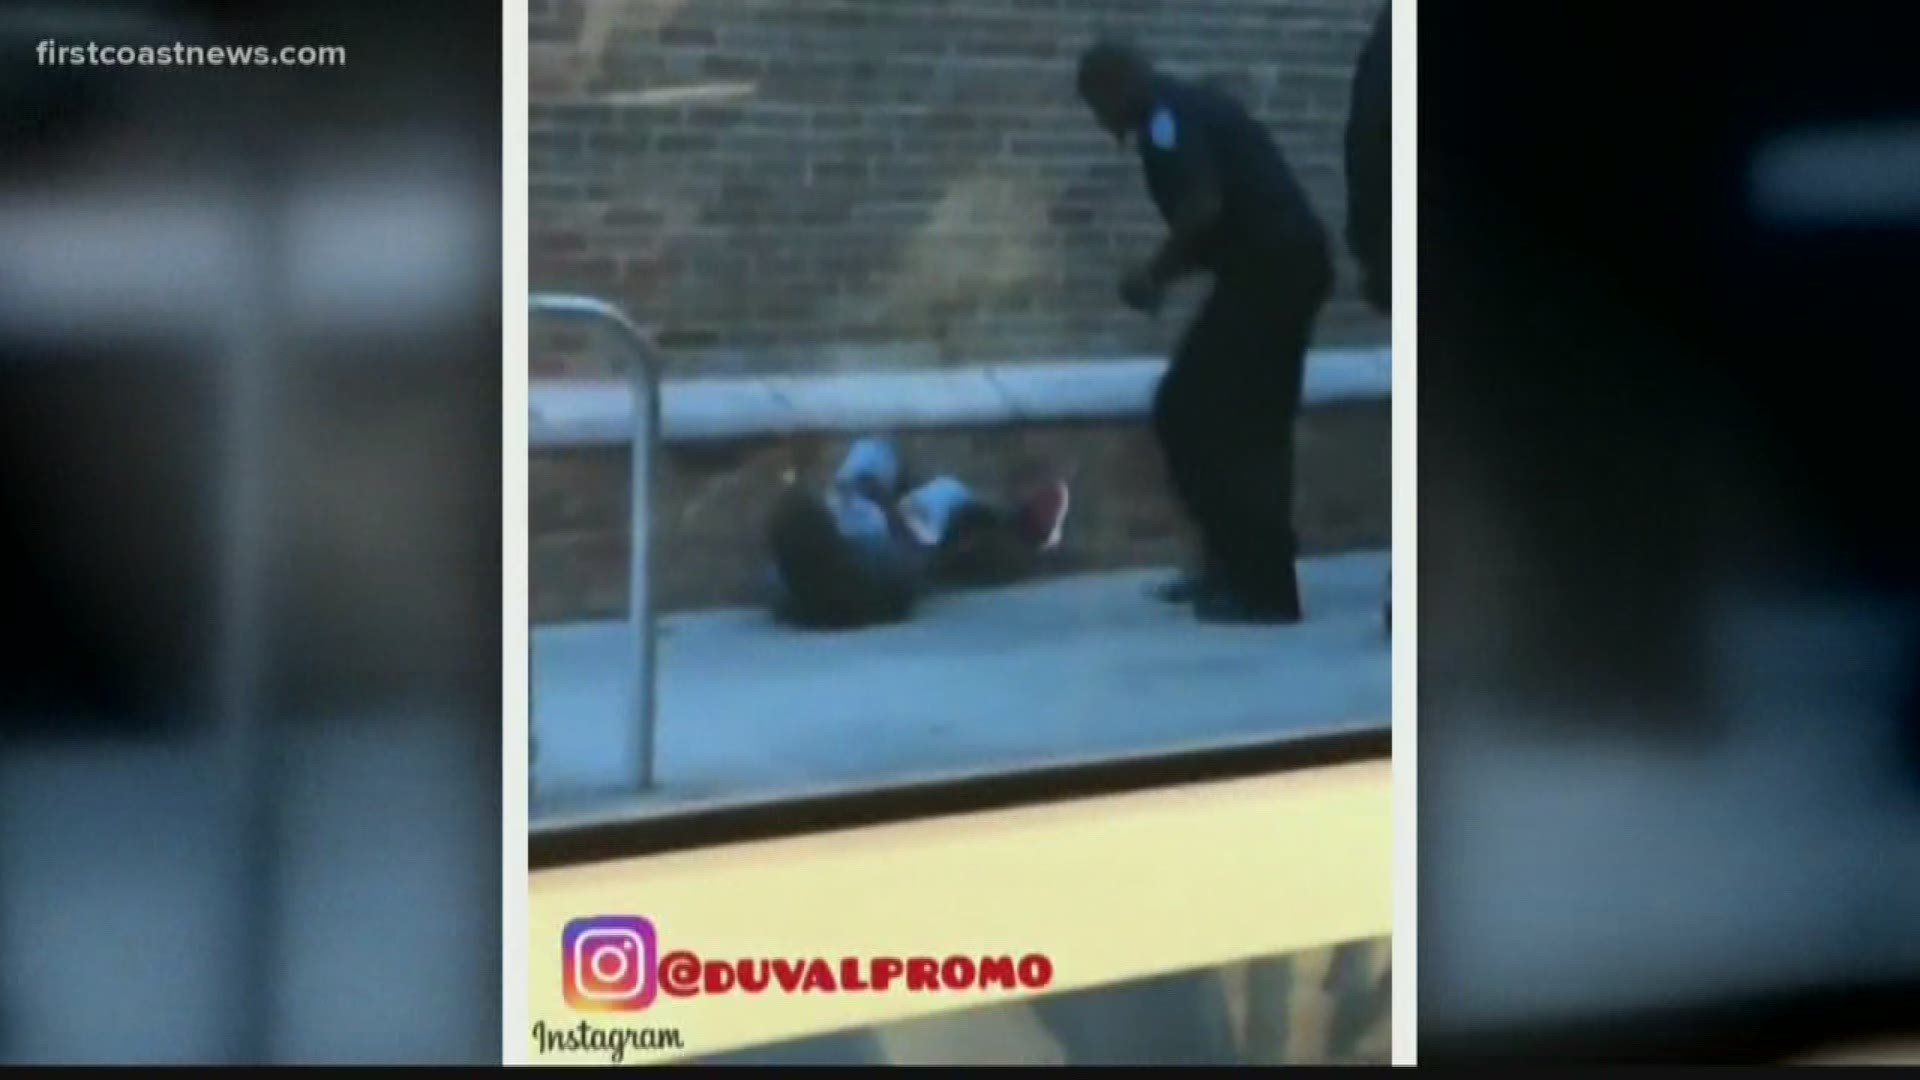 Duval County Public Schools terminated a resource officer after a video appeared to show the officer grabbing a female student by the neck and slamming her to the ground.